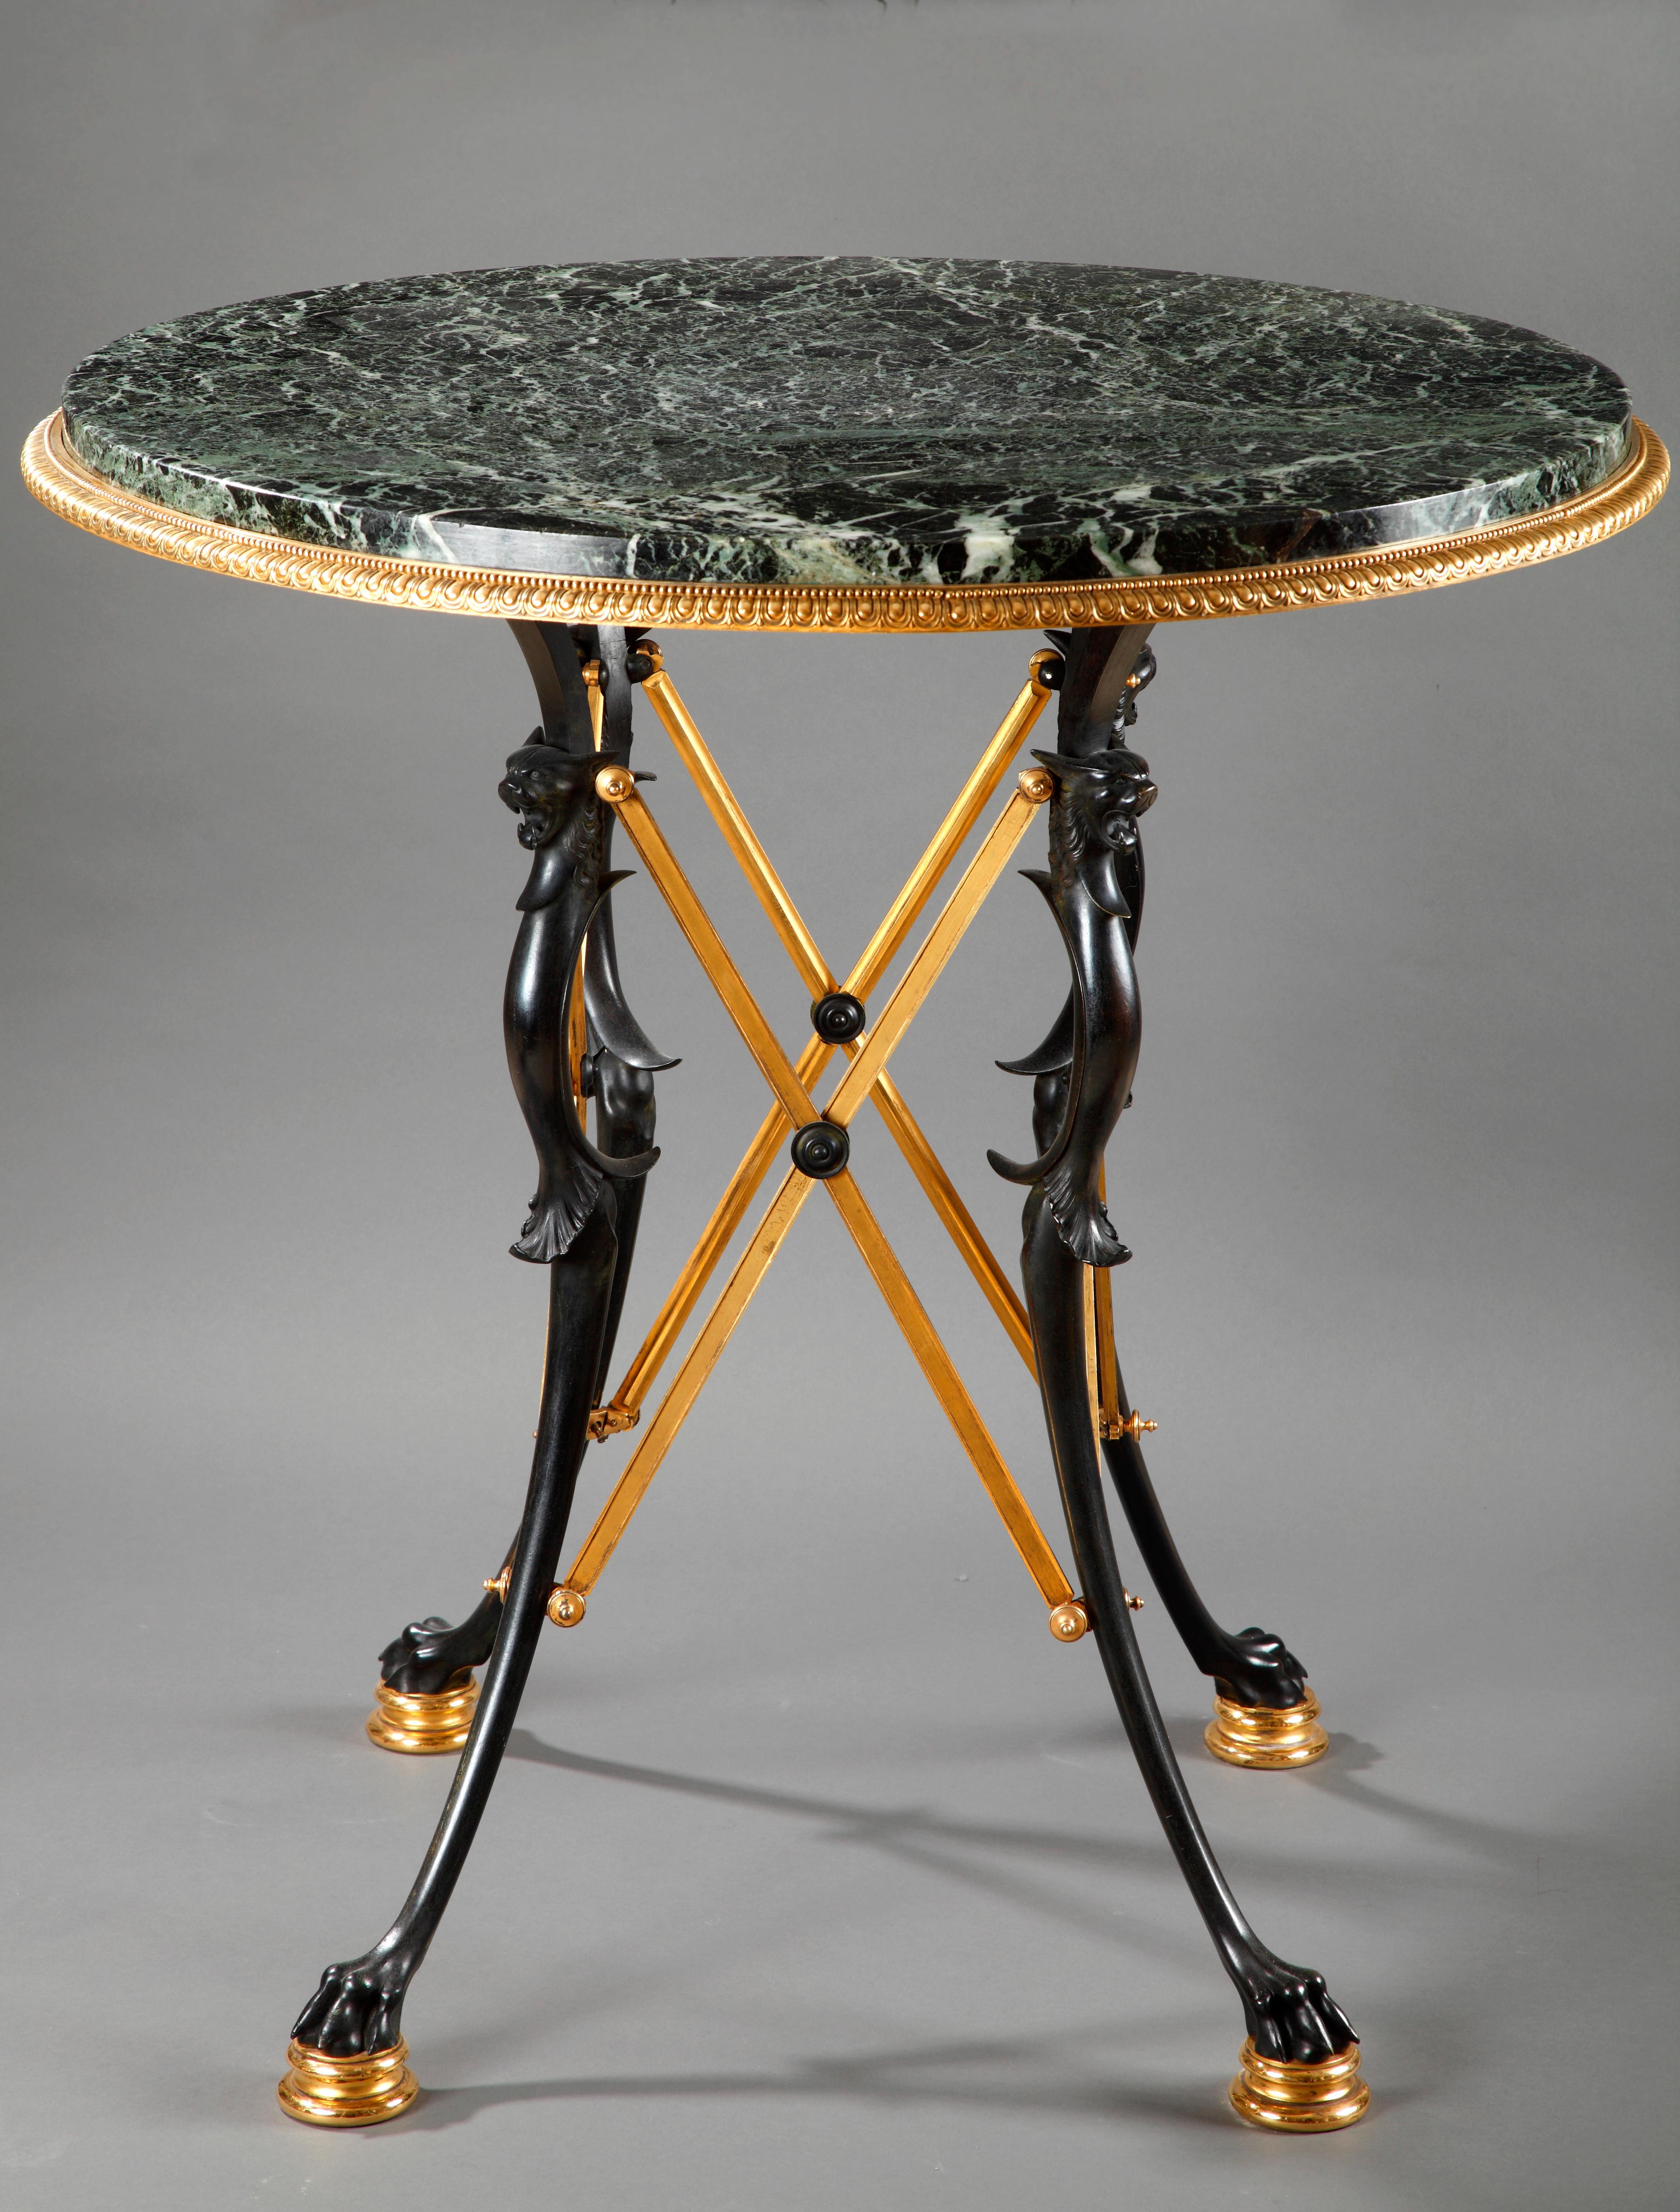 A similar model was exposed at the 1889 Paris Universal Exhibition ( see picture attached)

Patinated and gilded bronze gueridon with four paw feet joined by X-shaped stems, attributed to Sévin and Barbedienne. Round green marble top mounted with a